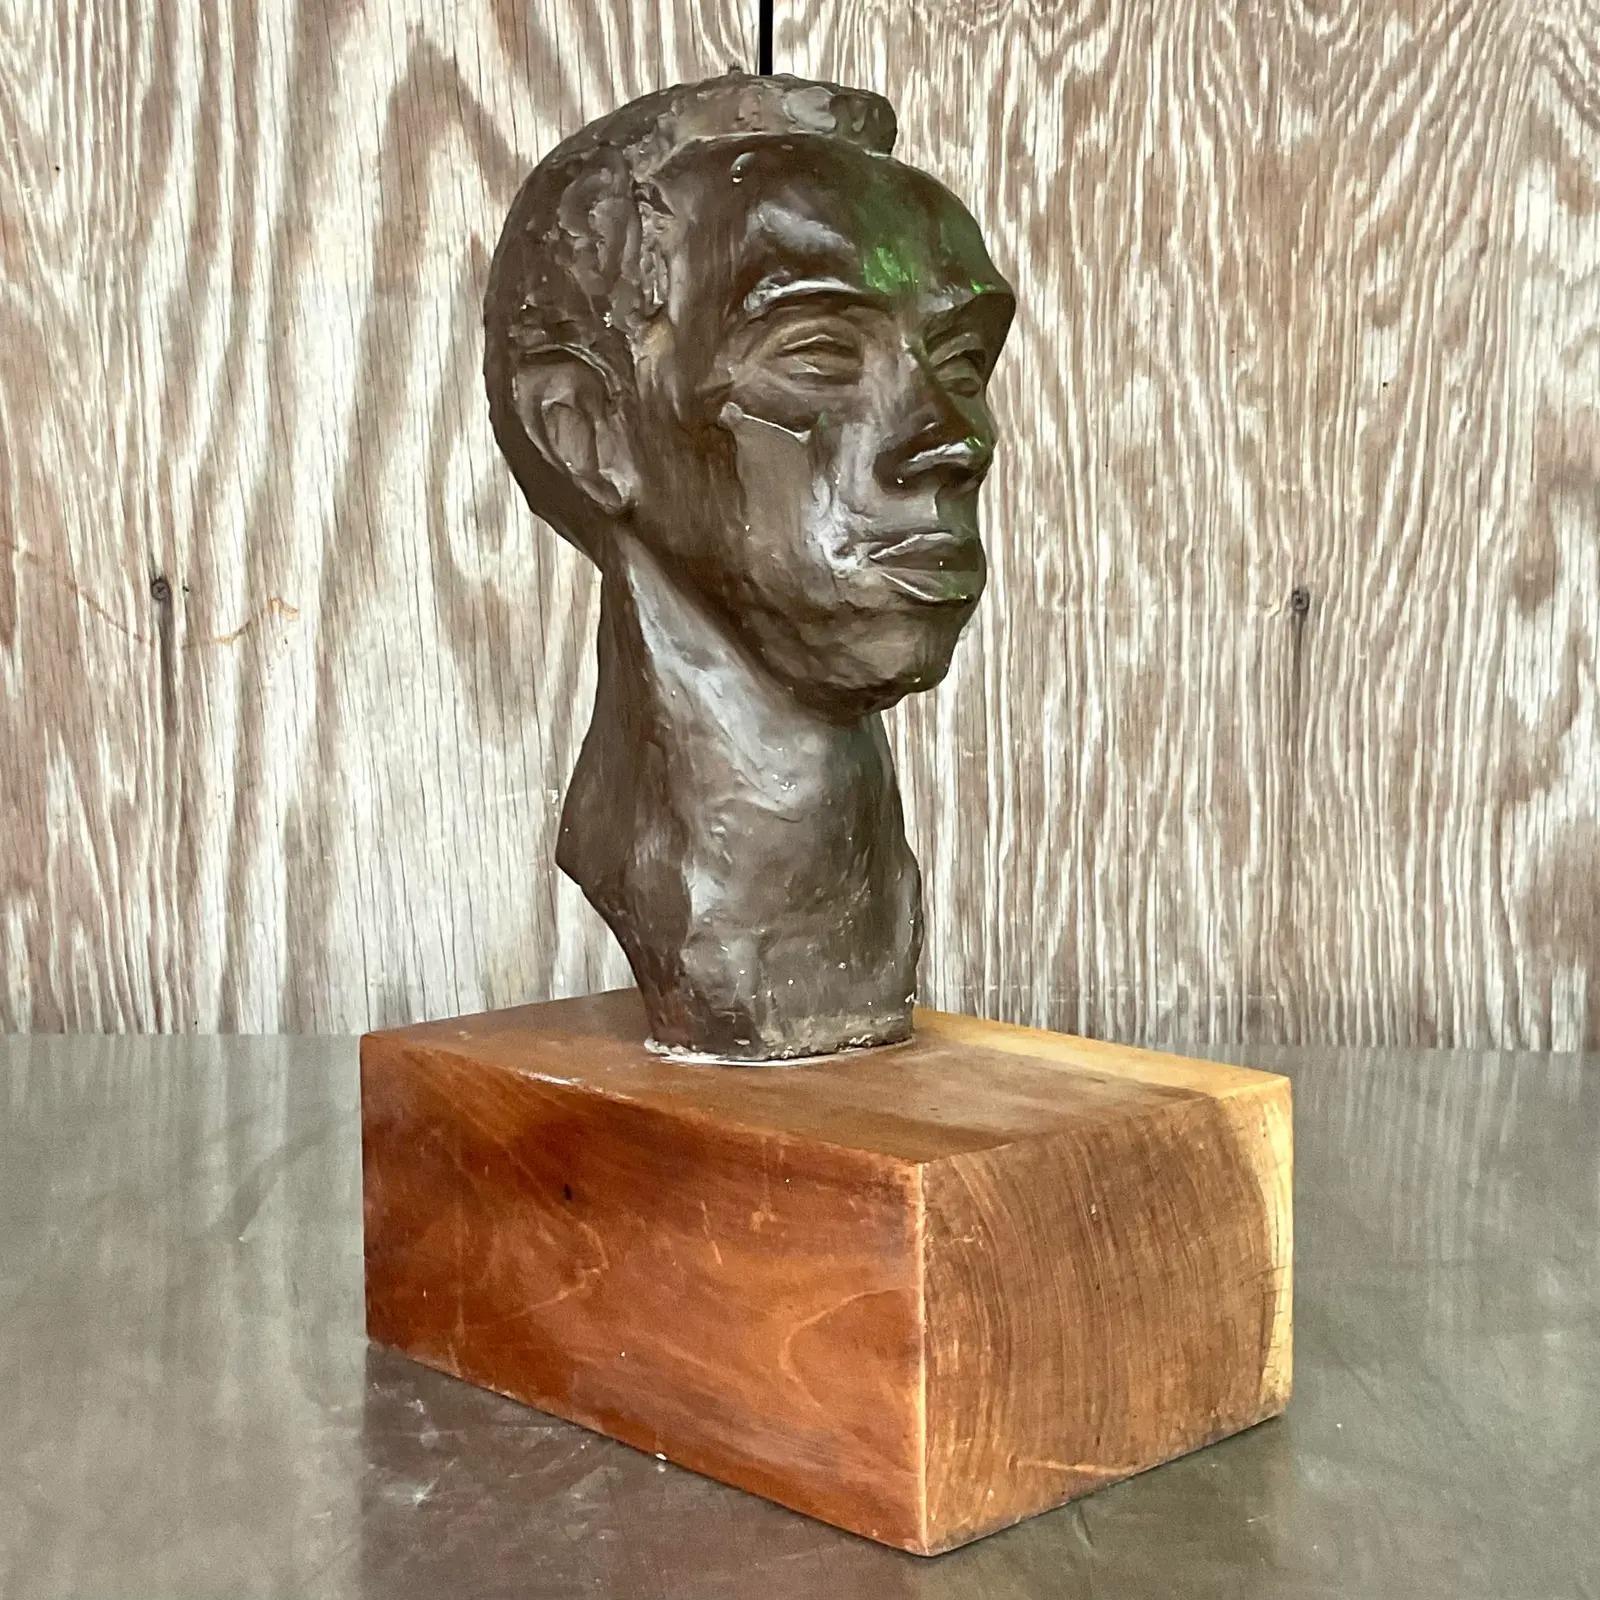 A brilliant vintage Boho sculpture. An amazing plaster composition with beautiful attention to detail. Rests on a wood plinth. Signed on the bottom. Acquired from a Palm Beach estate.